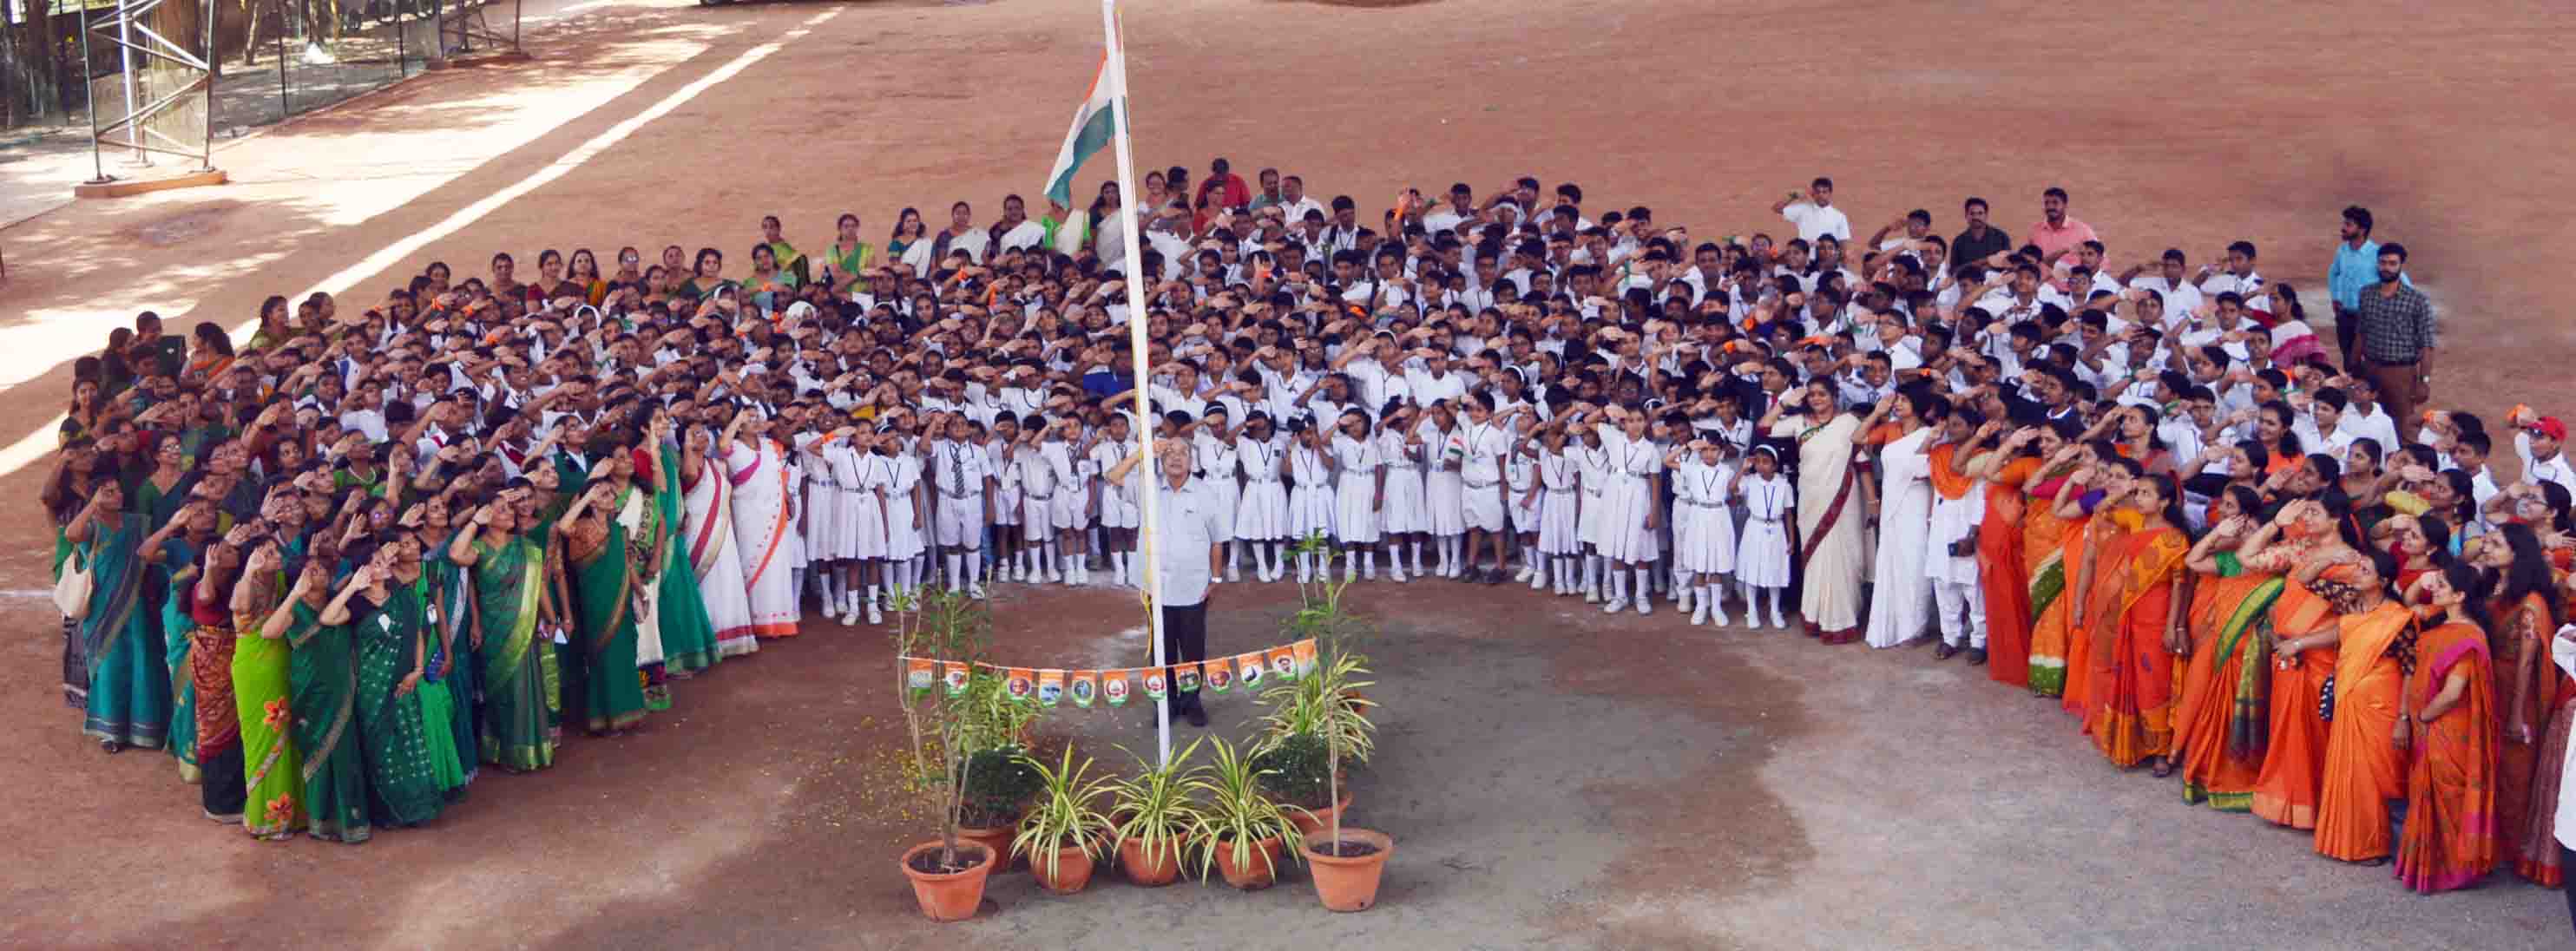 Saraswathi Vidyalaya celebrated 73rd Independence Day with great zeal and patriotic fervour in the school ground